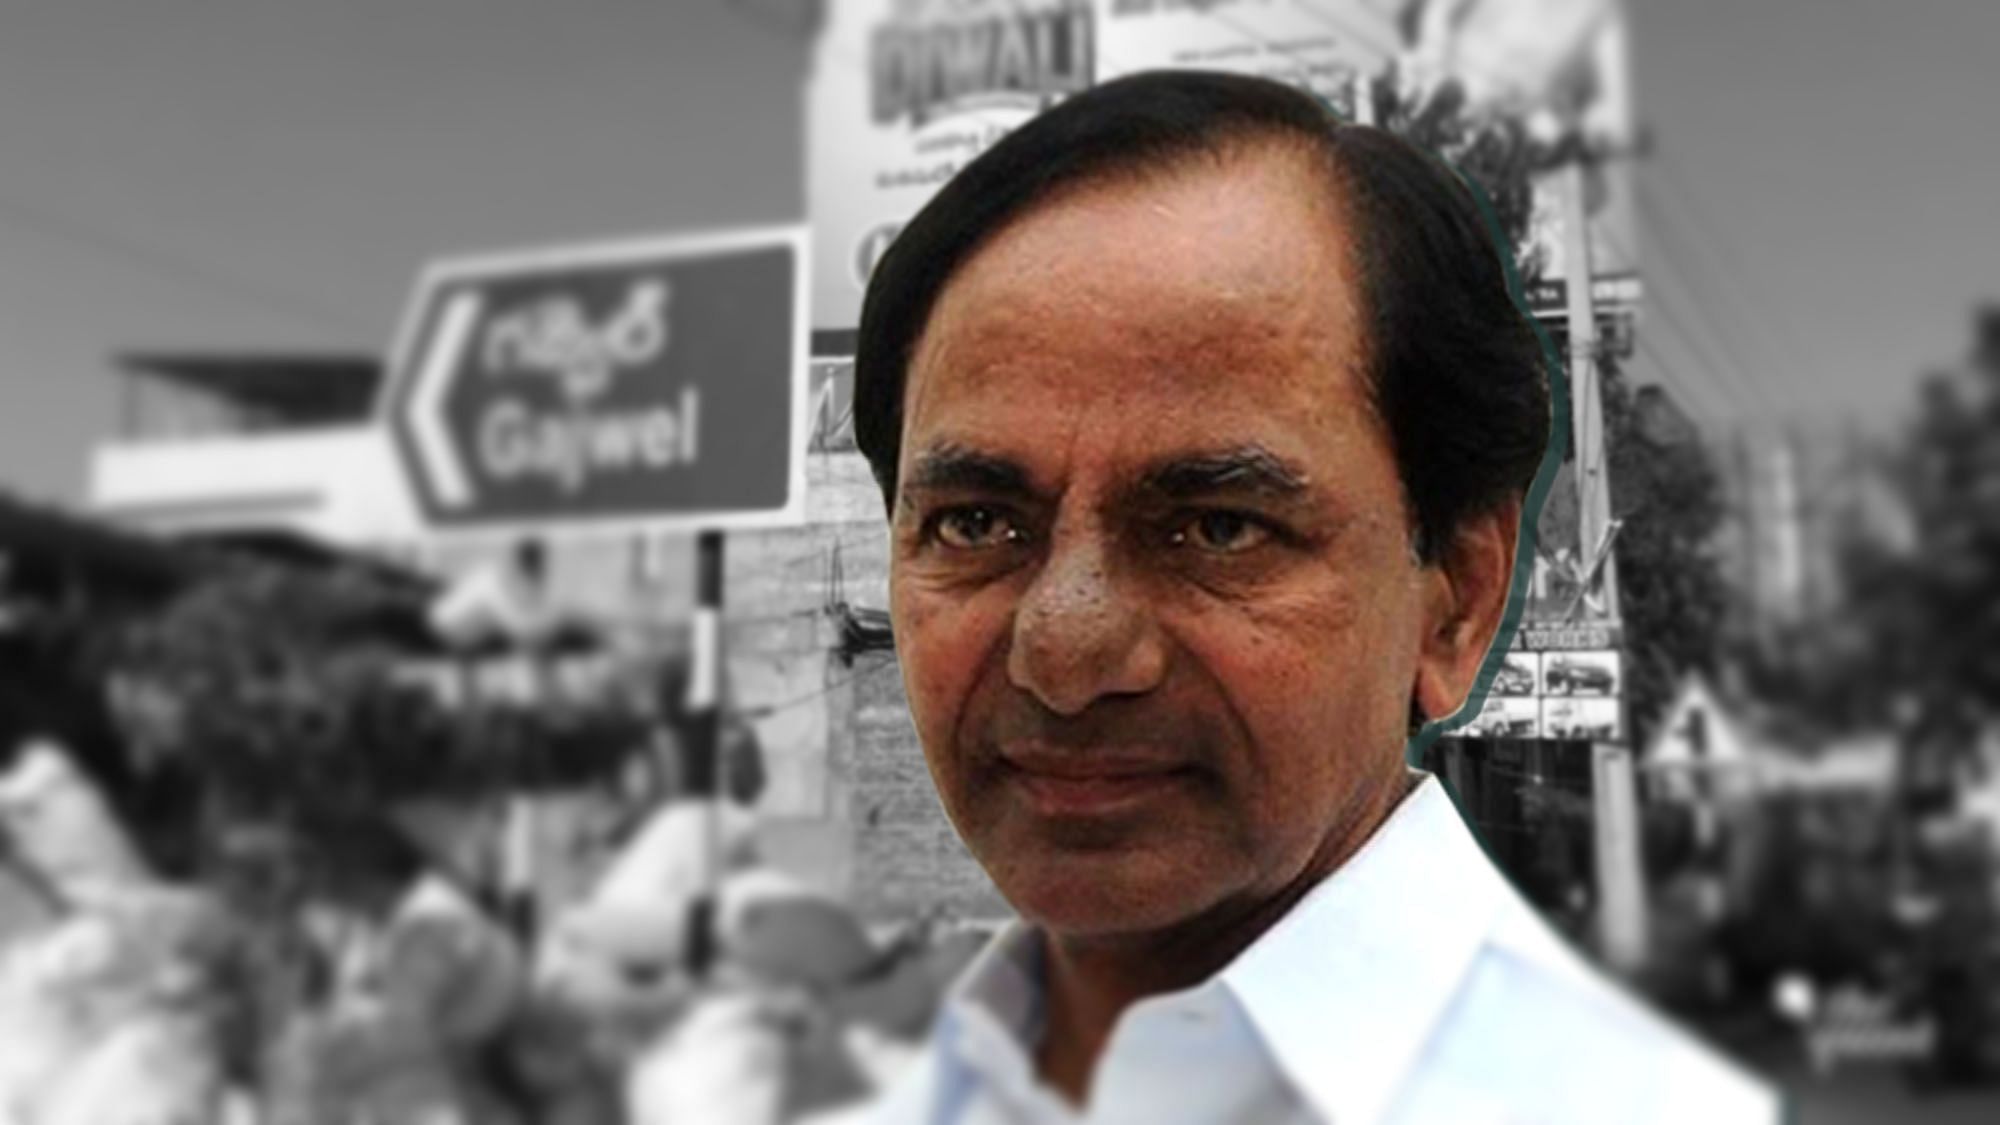 KCR transformed his constituency Gajwel into a model town. But did he do enough to earn him a second term?